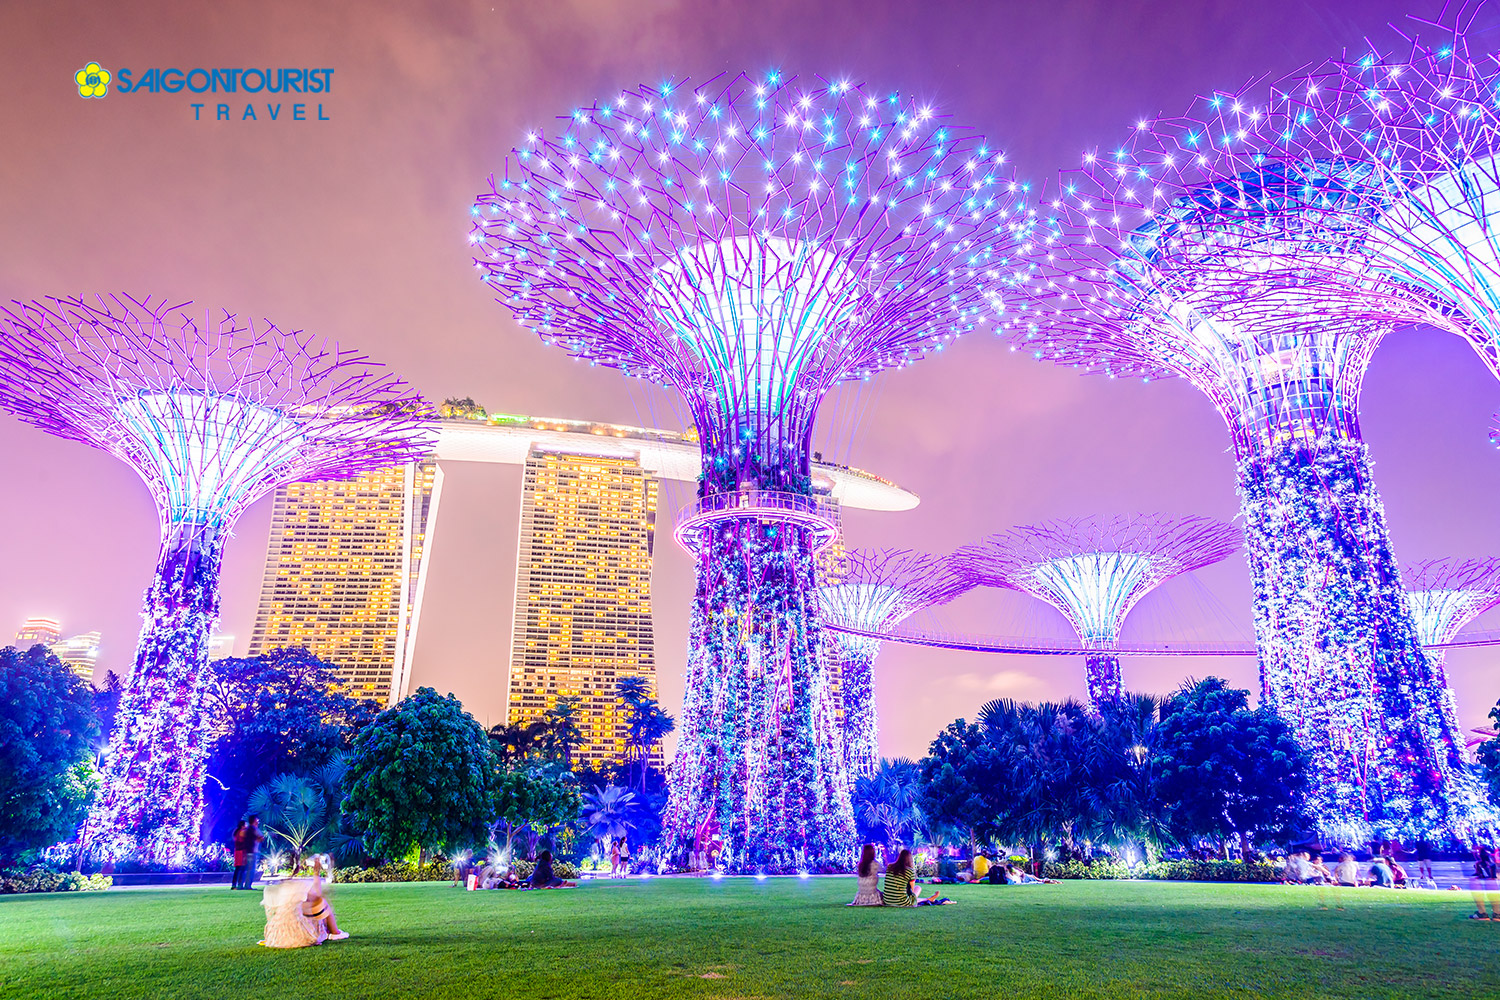 Du Lịch MALAYSIA - SINGAPORE [KUALA LUMPUR - DAY TOUR GENTING - BATU CAVES - MALACCA - SEA AQUARIUM - GARDENS BY THE BAY - FLOWER DOME -  RIVER WONDERS - WINGS OF TIME]